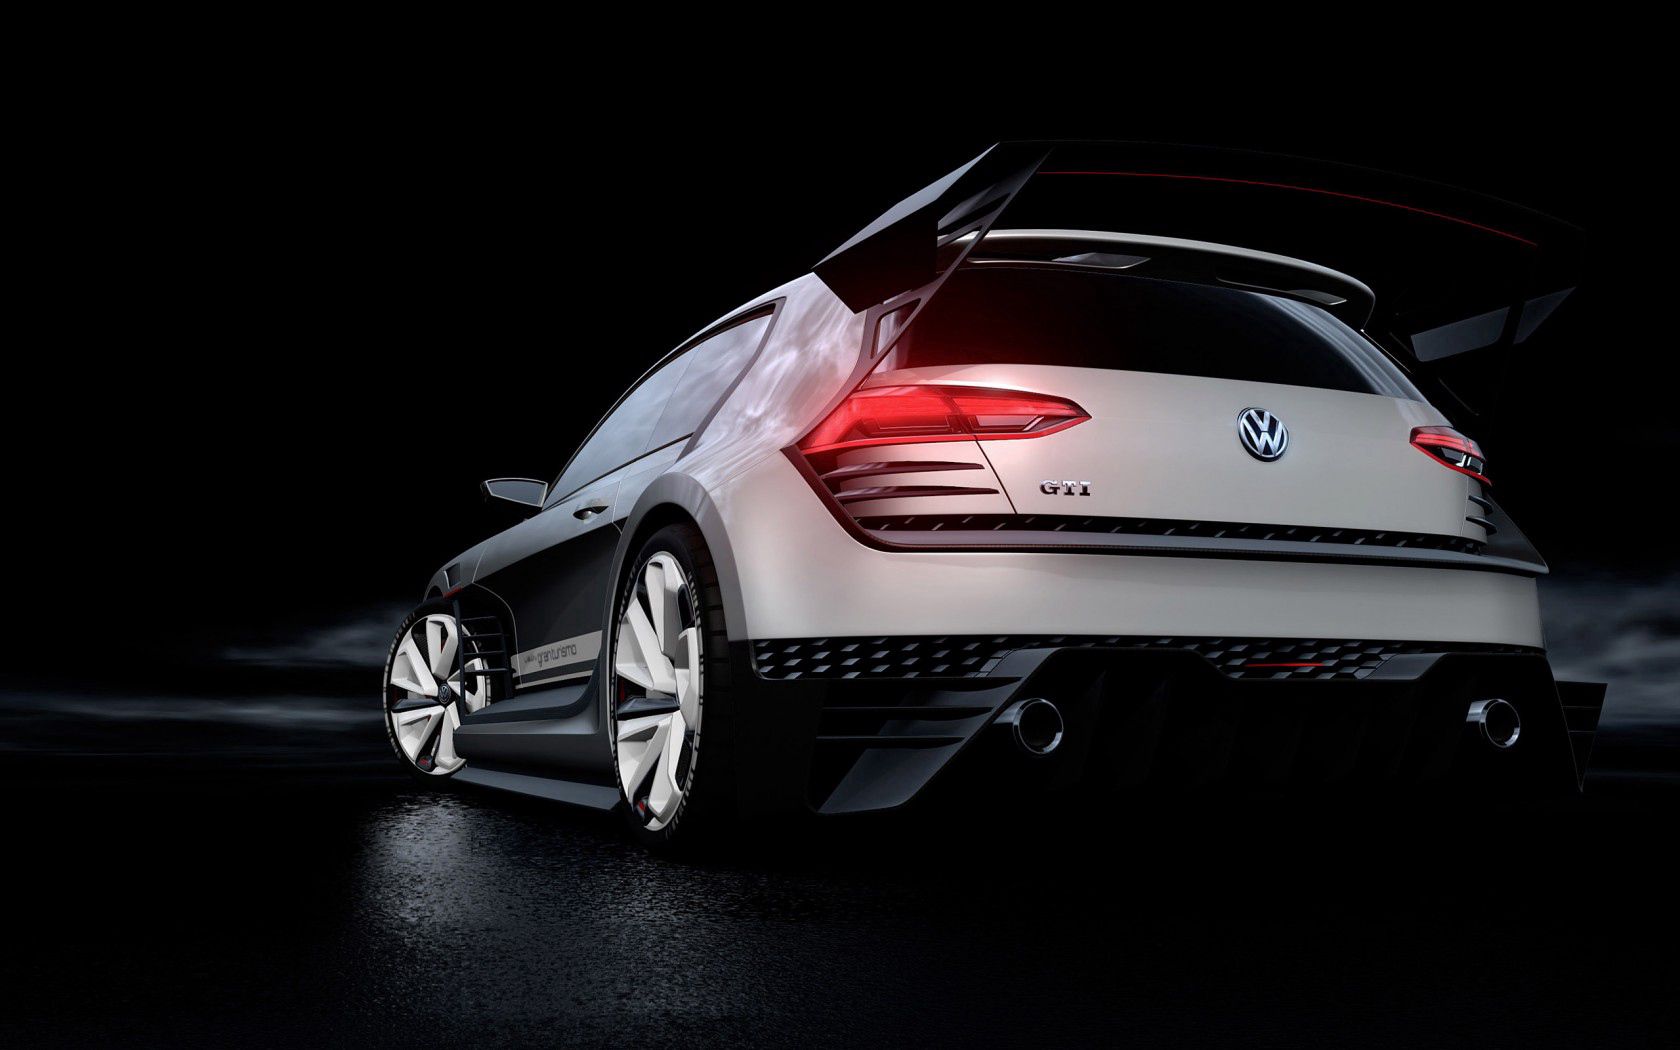 133555 download wallpaper volkswagen, cars, concept, back view, rear view, style, gti screensavers and pictures for free